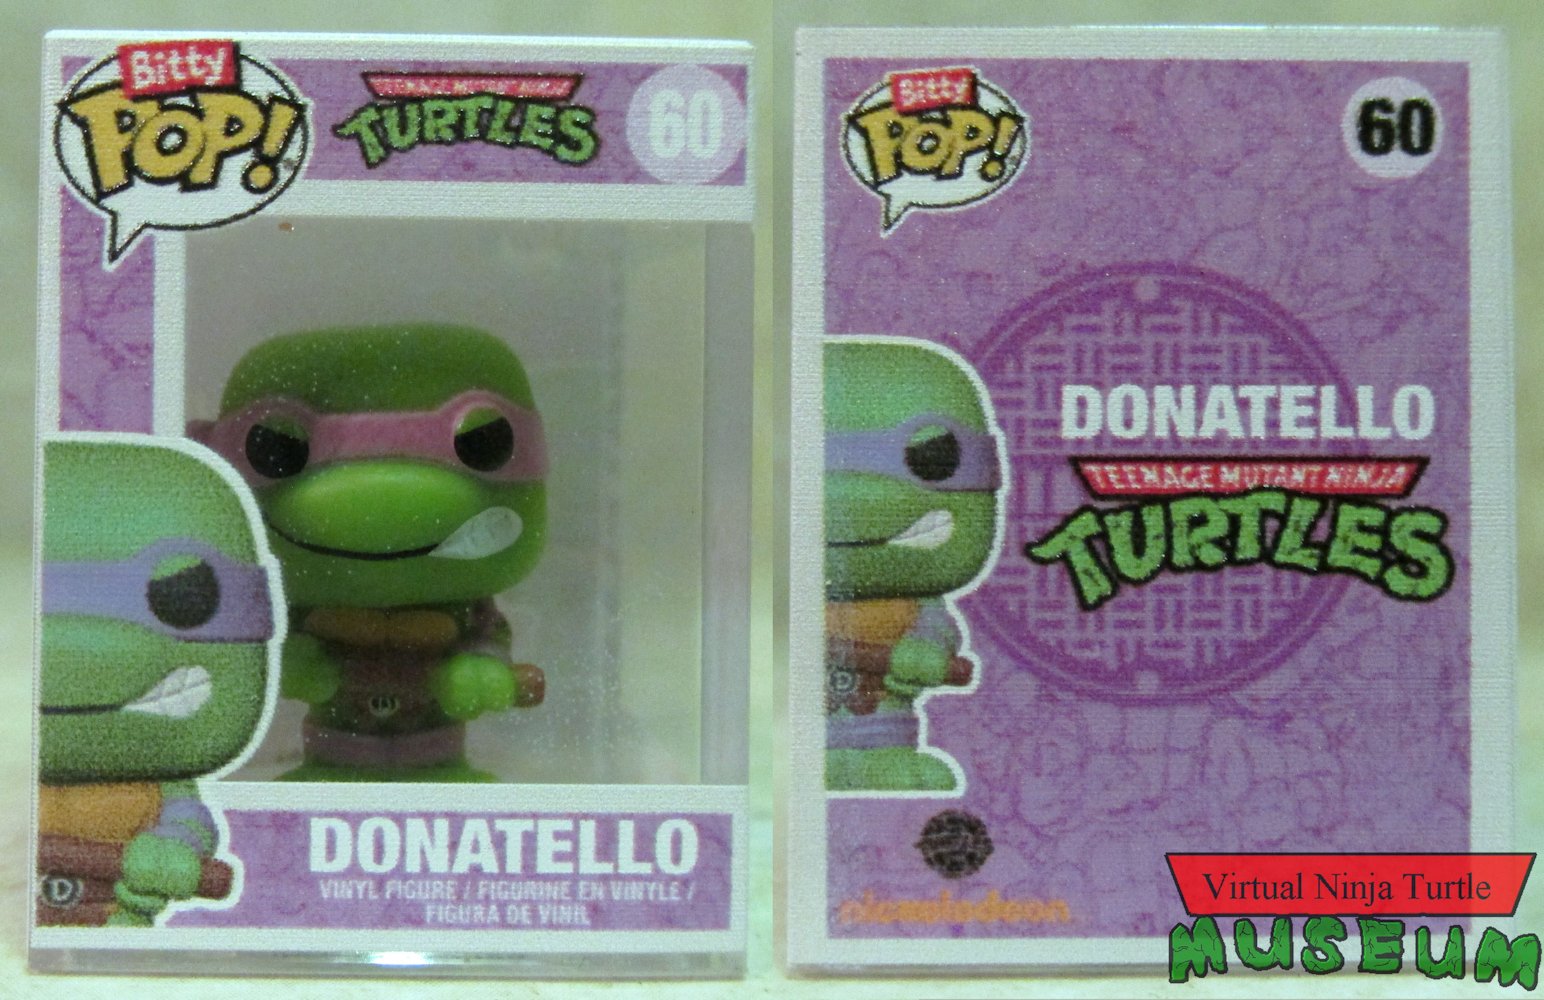 Donatello in case front and back